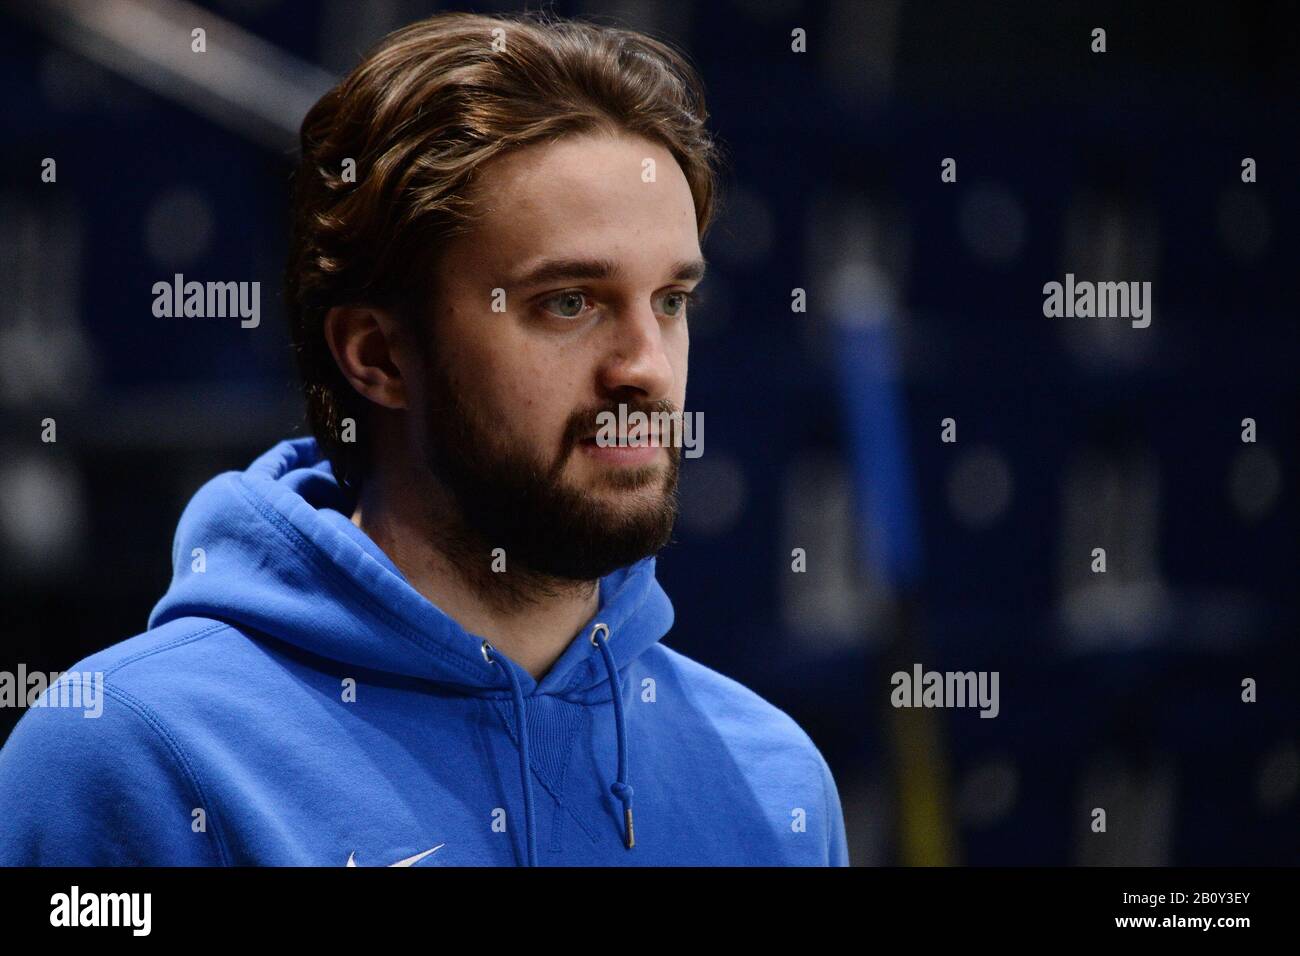 21.2.2020, Zürich, Hallenstadion, NL: ZSC Lions - HC Ambrì Piotta, forward Dominik Diem (ZSC) warms upZSC plays at home vs HC Ambri-Piotta for one of the last home game in NLA regular season 2020. ZSC Lions Zurich host HC Ambri Piotta. Lions won 3-1 after a hard game. (Photo by Sergio Brunetti/Pacific Press) Stock Photo